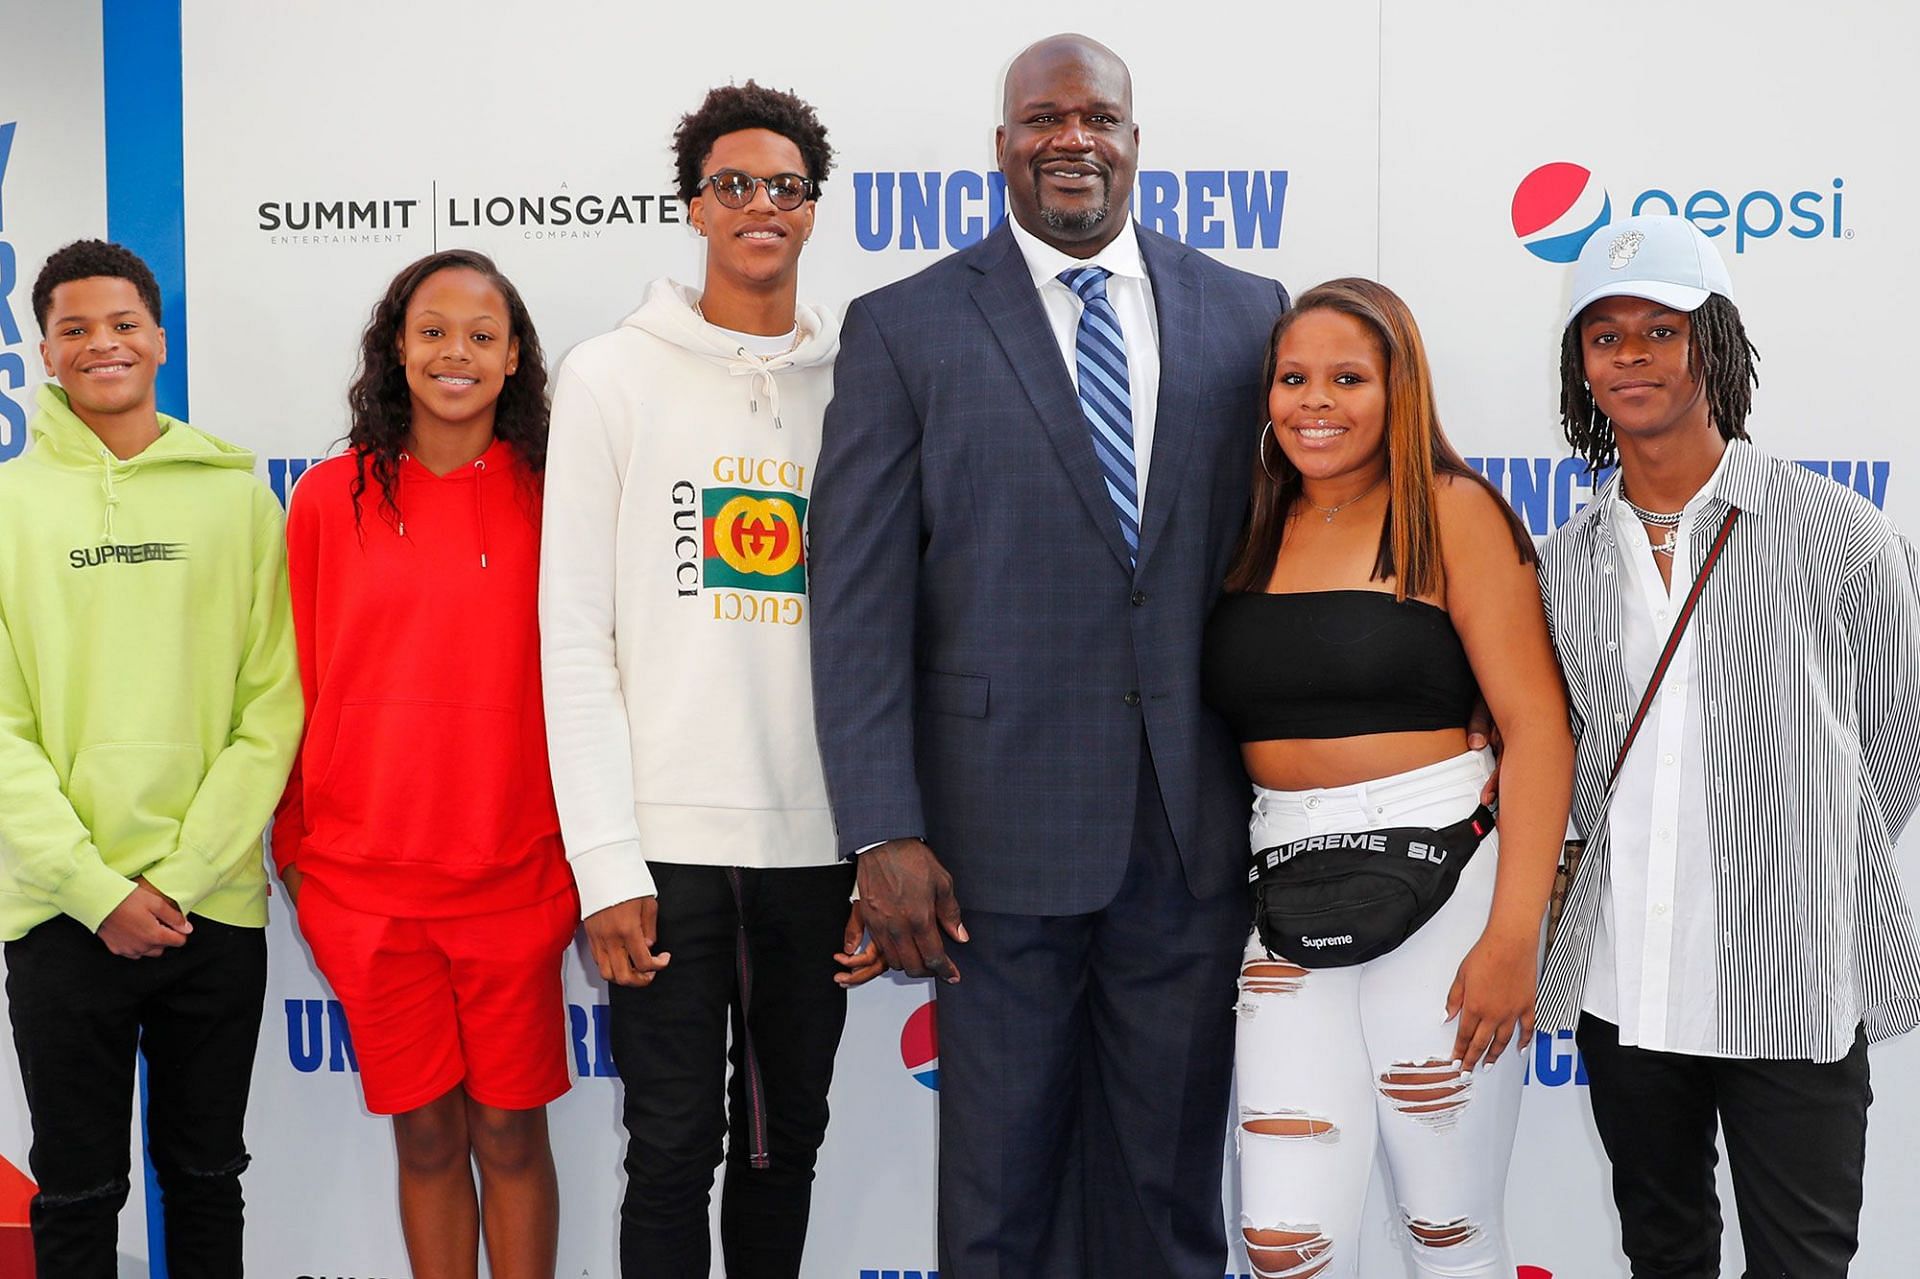 “Myles is the cunning smart one” Shaquille O’Neal heaps praise on his